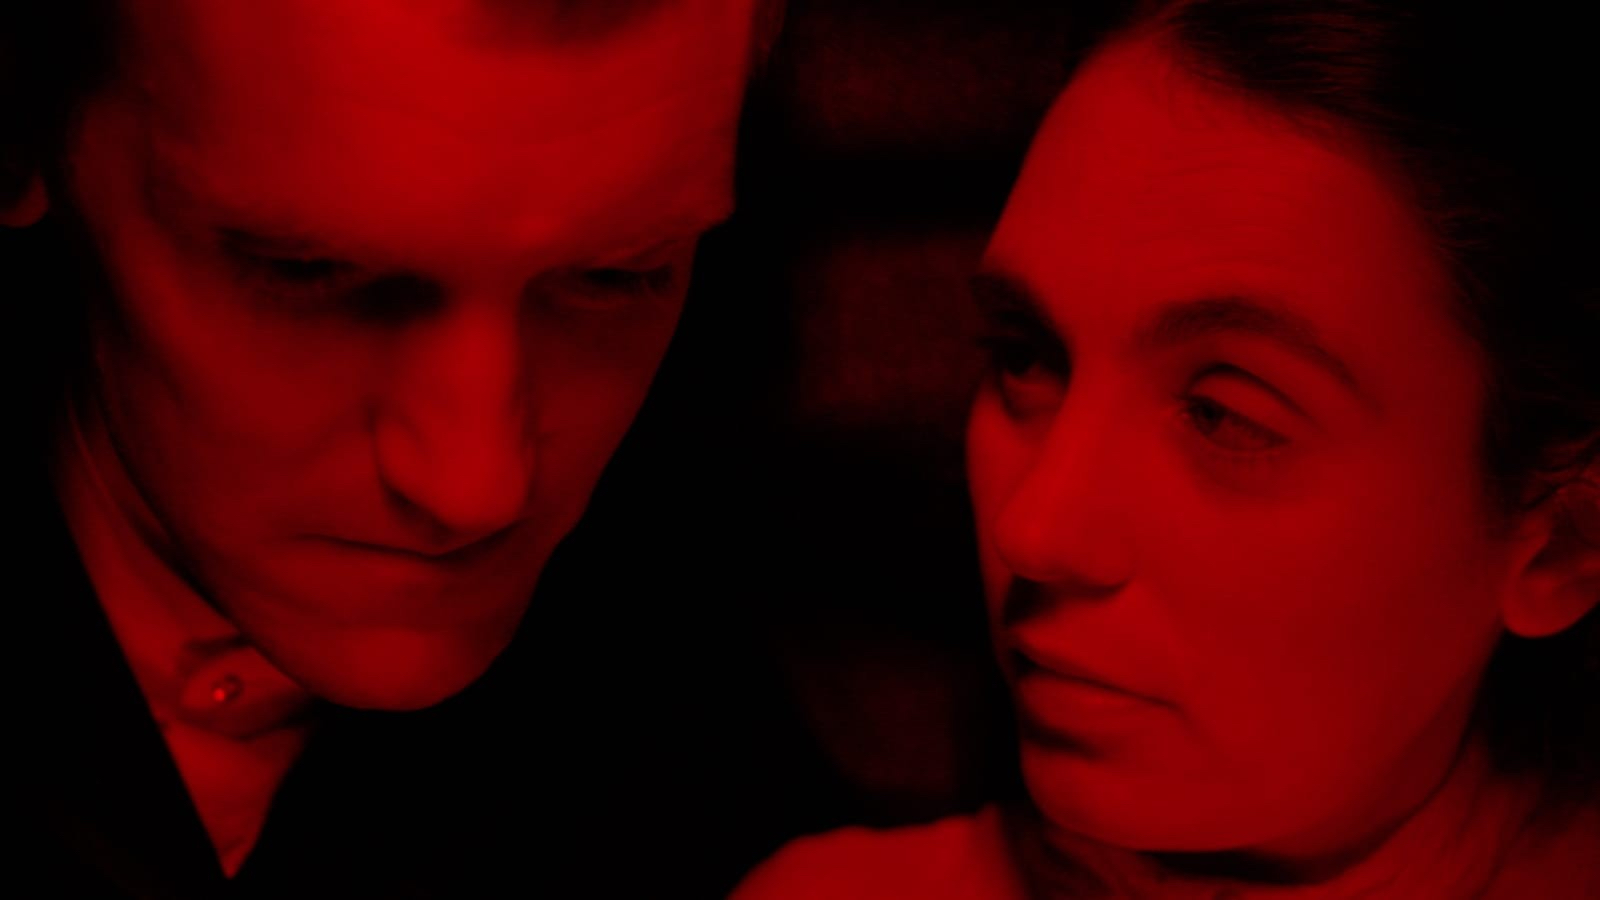 A young man, looking down and a woman looking at the man, both bathed in red light